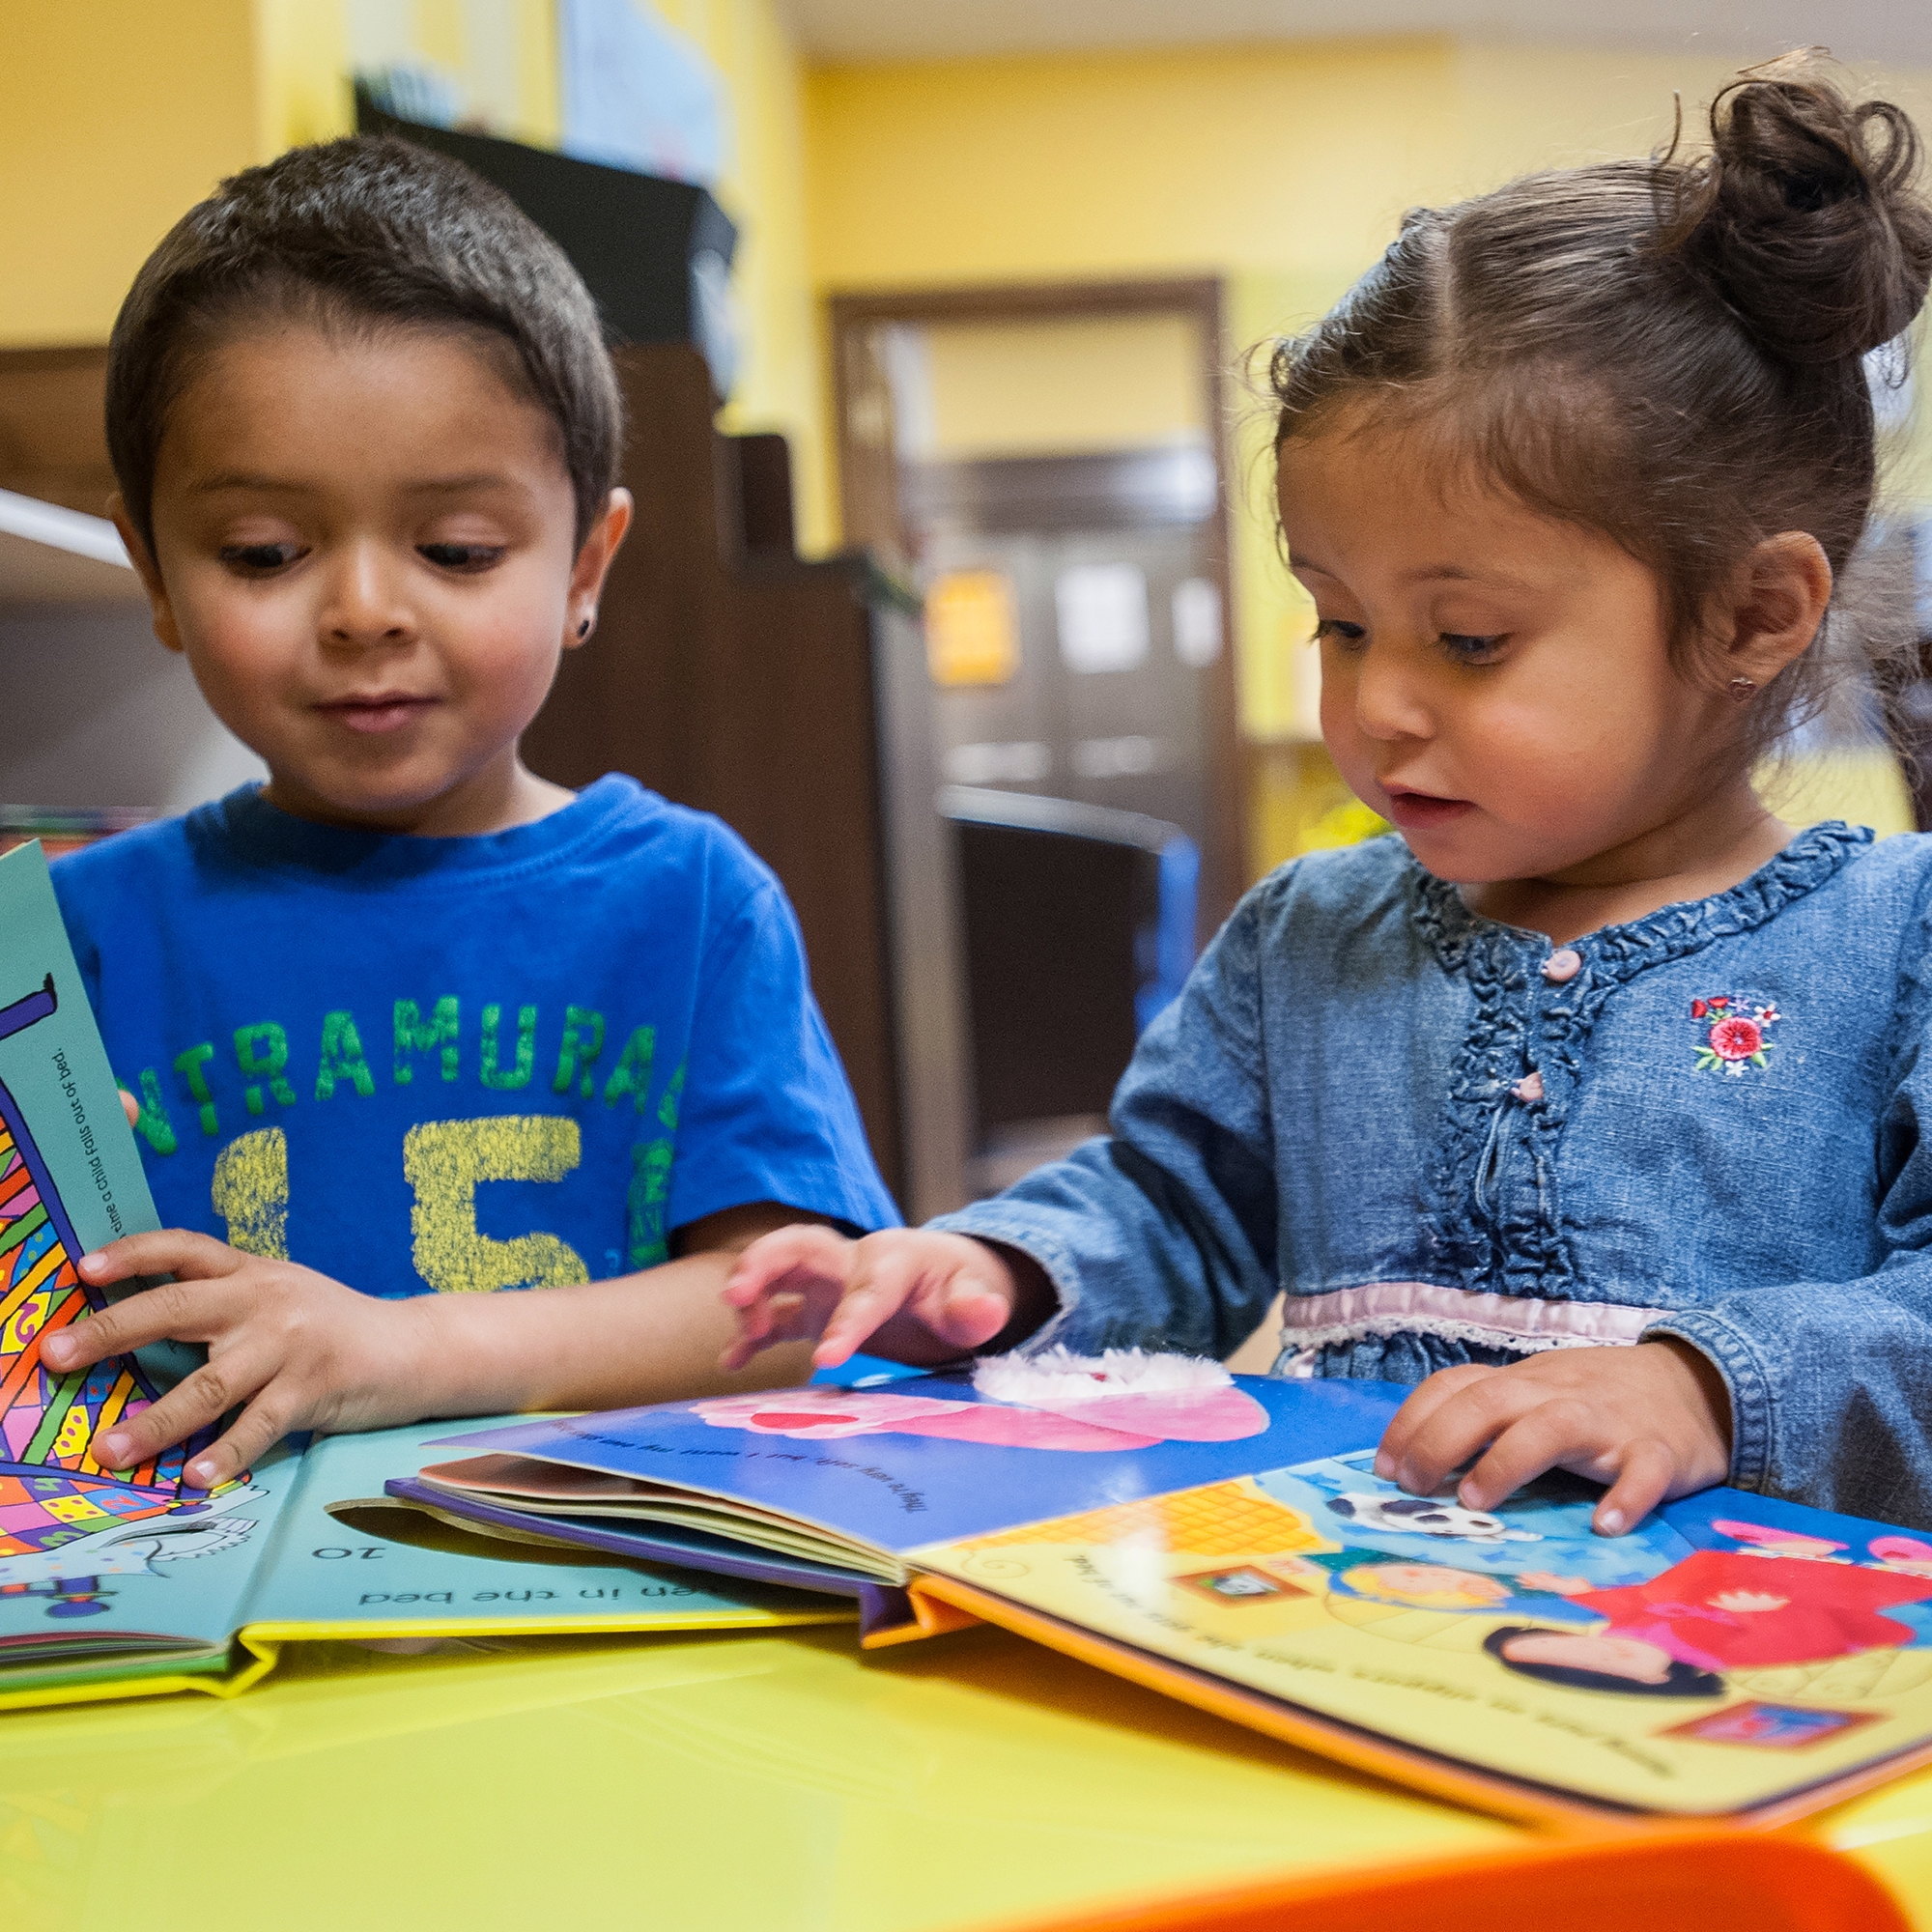 Two young children sit at a table together and look at colorful picture books. Save the Children’s early learning programs promote reading from a young age. Photo credit: Susan Warner / Save the Children 2016.